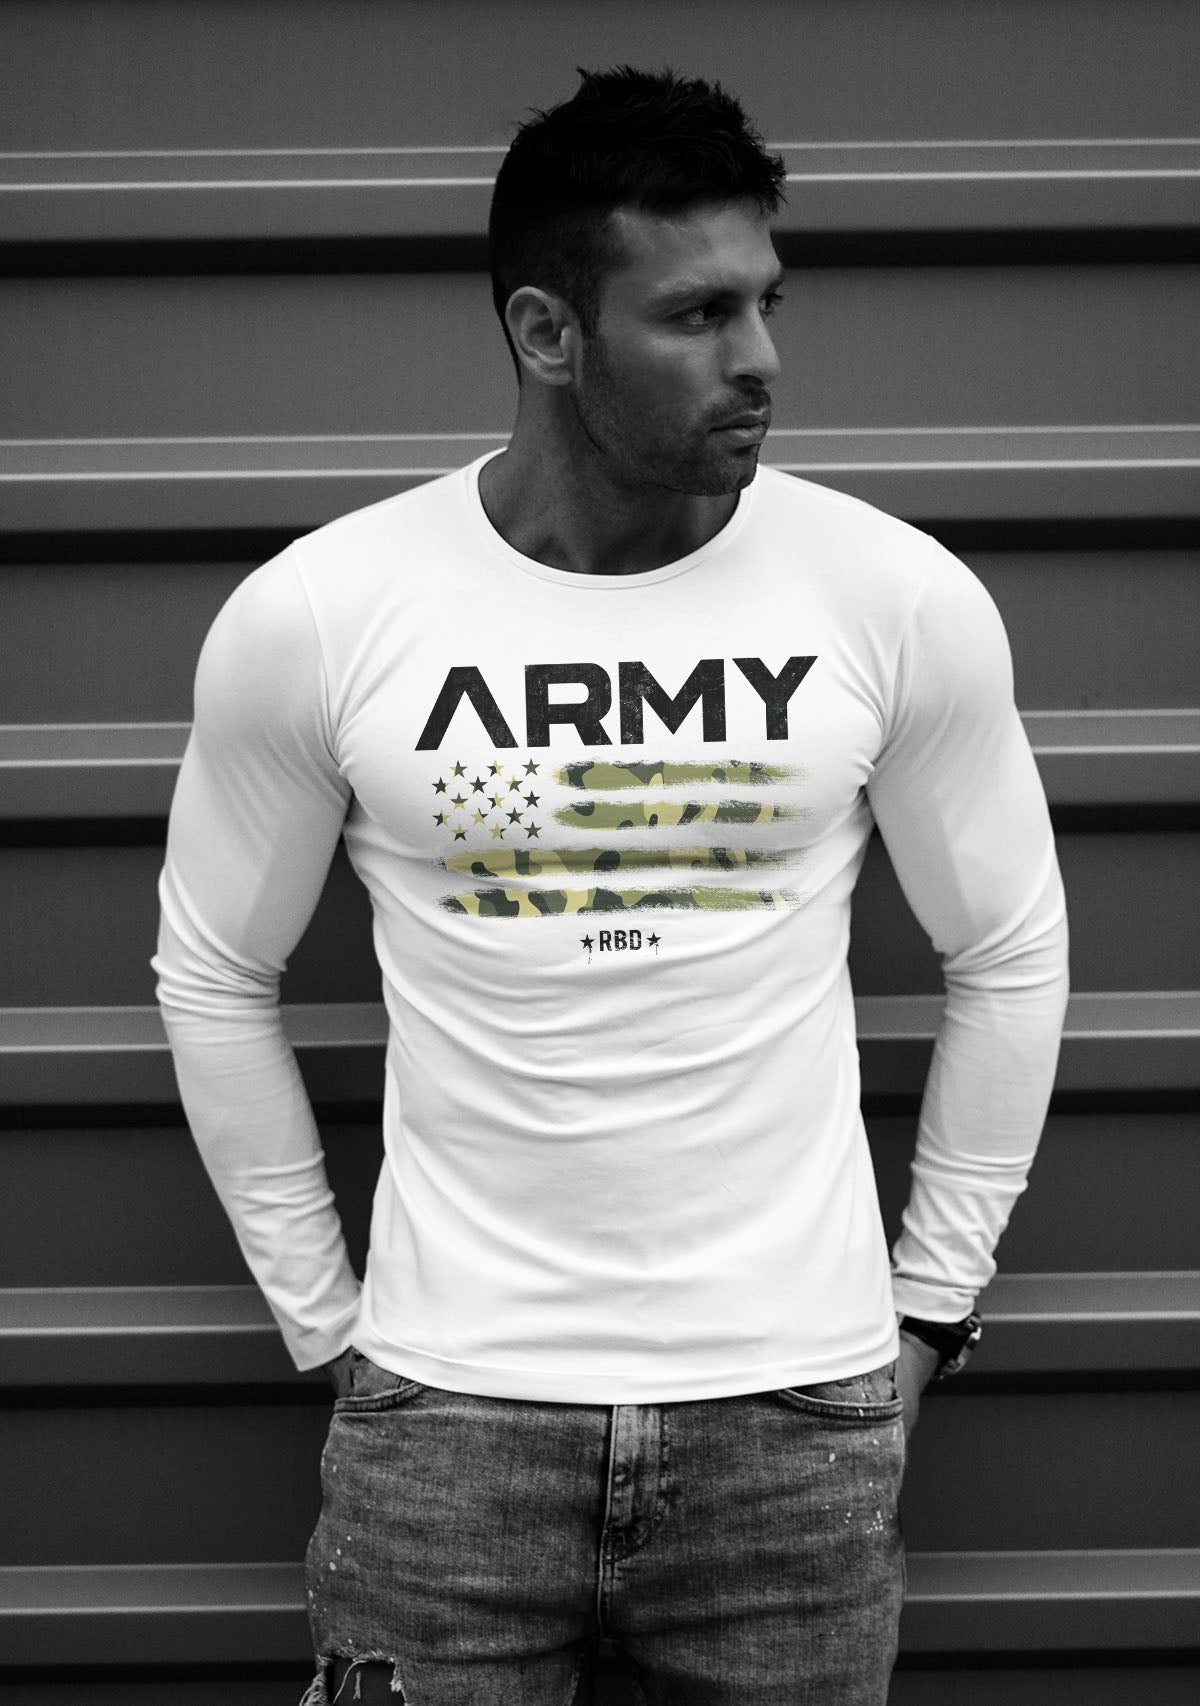 Mens Long Sleeve T-shirt "ARMY" Camouflage Flag MD711